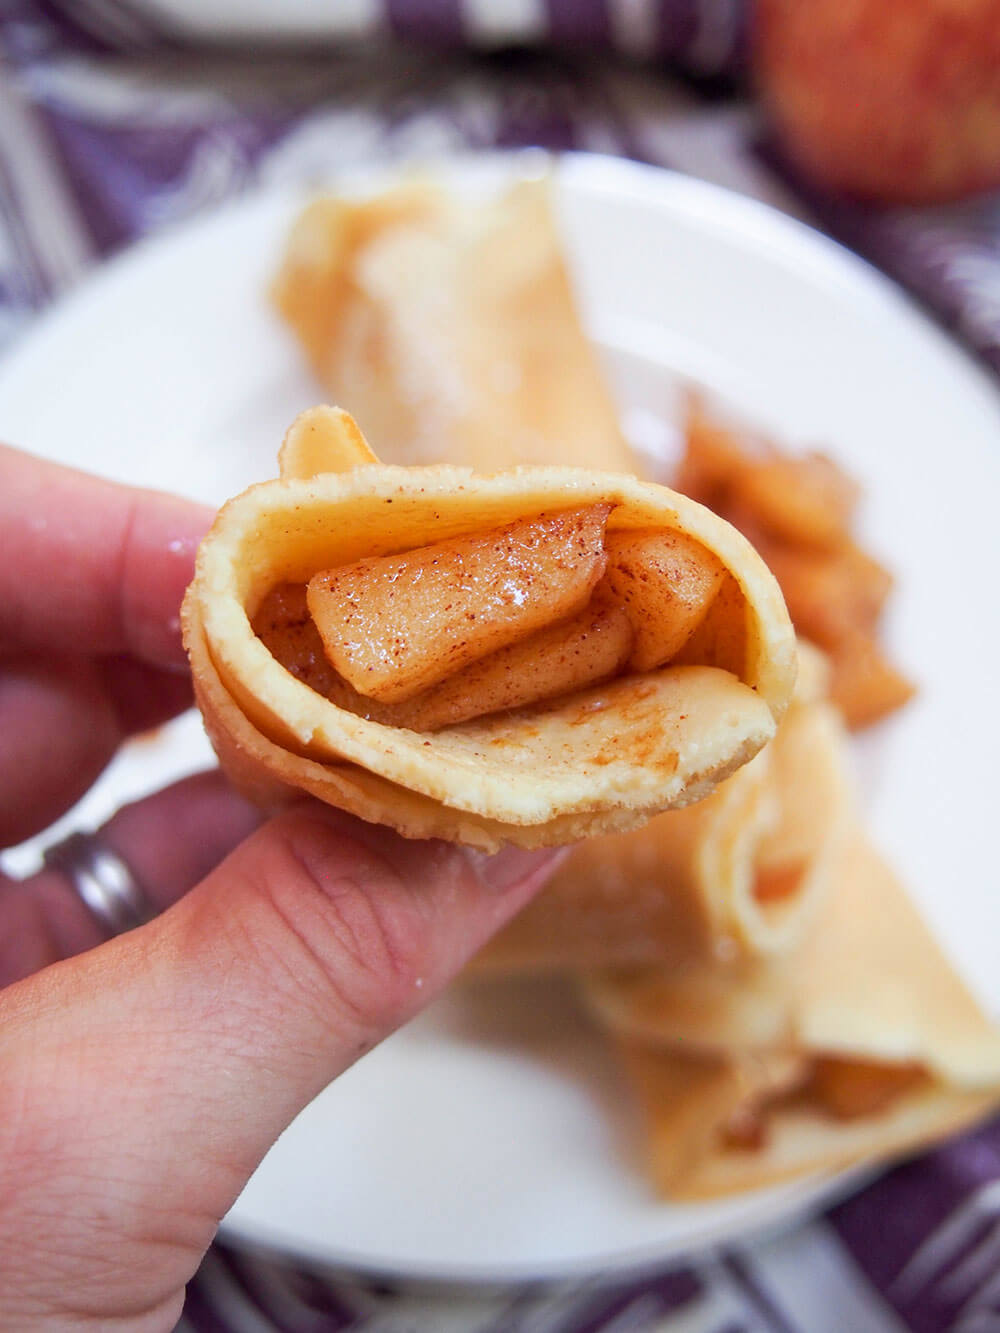 apple crepes held in hand showing filling inside